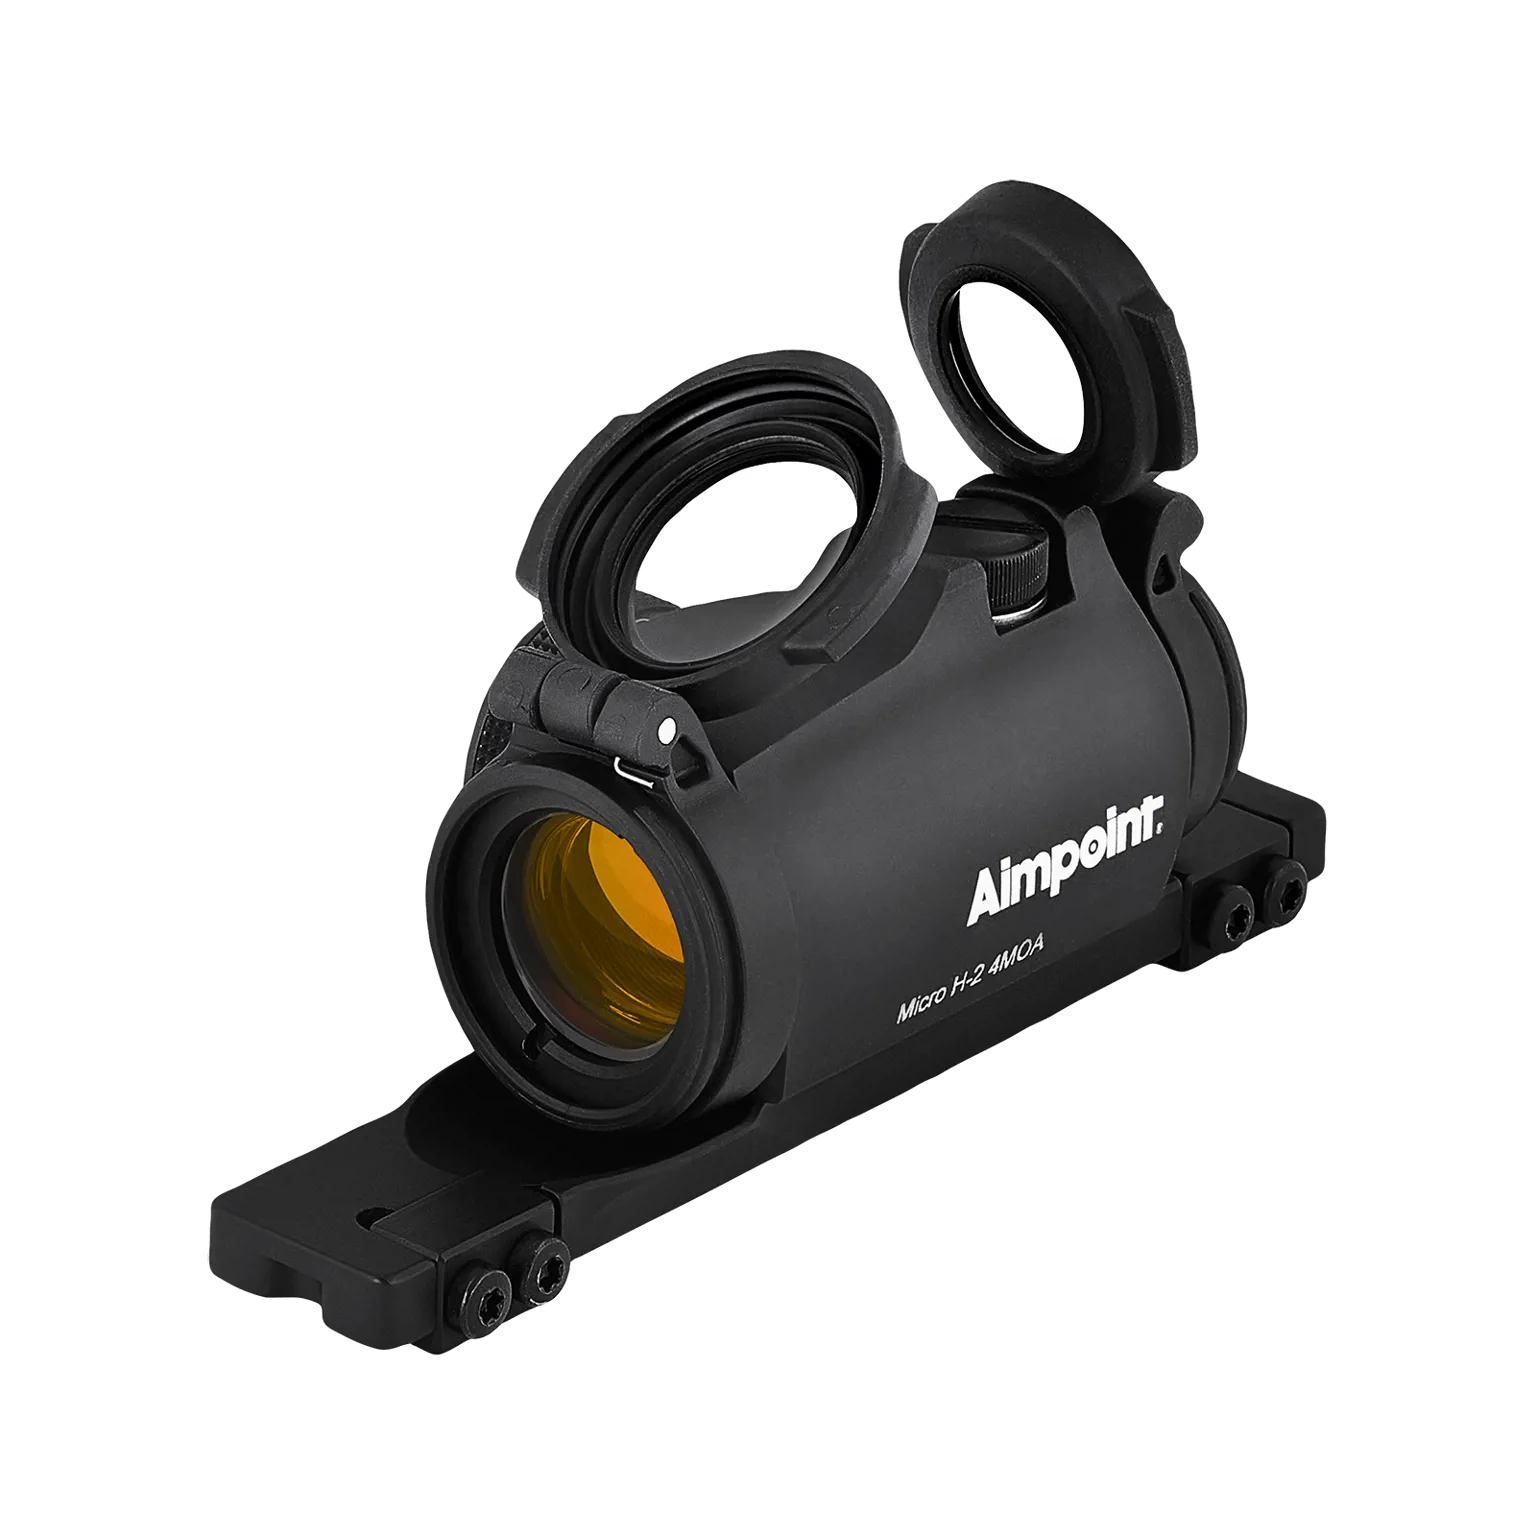 Micro H-2™ 4 MOA - Red dot reflex sight with mount for semi-automatic shotguns - 1